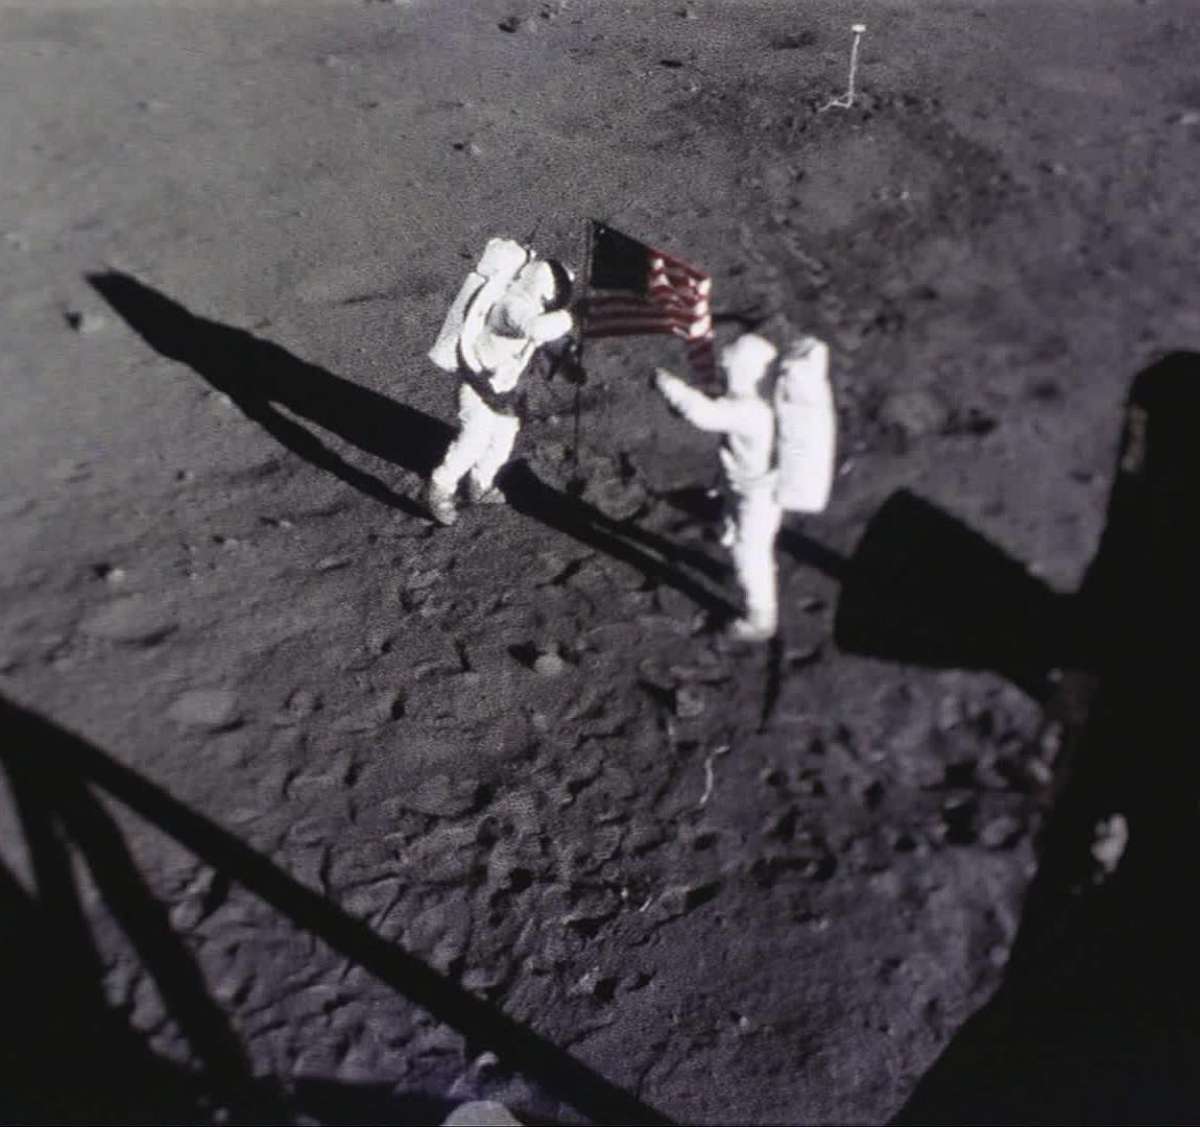 PHOTO: Astronauts Neil Armstrong and Buzz Aldrin place the American flag on the Moon, July 20, 1969. This image was captured by the Apollo 11 Data Acquisition Camera that was mounted to the lunar module Eagle.